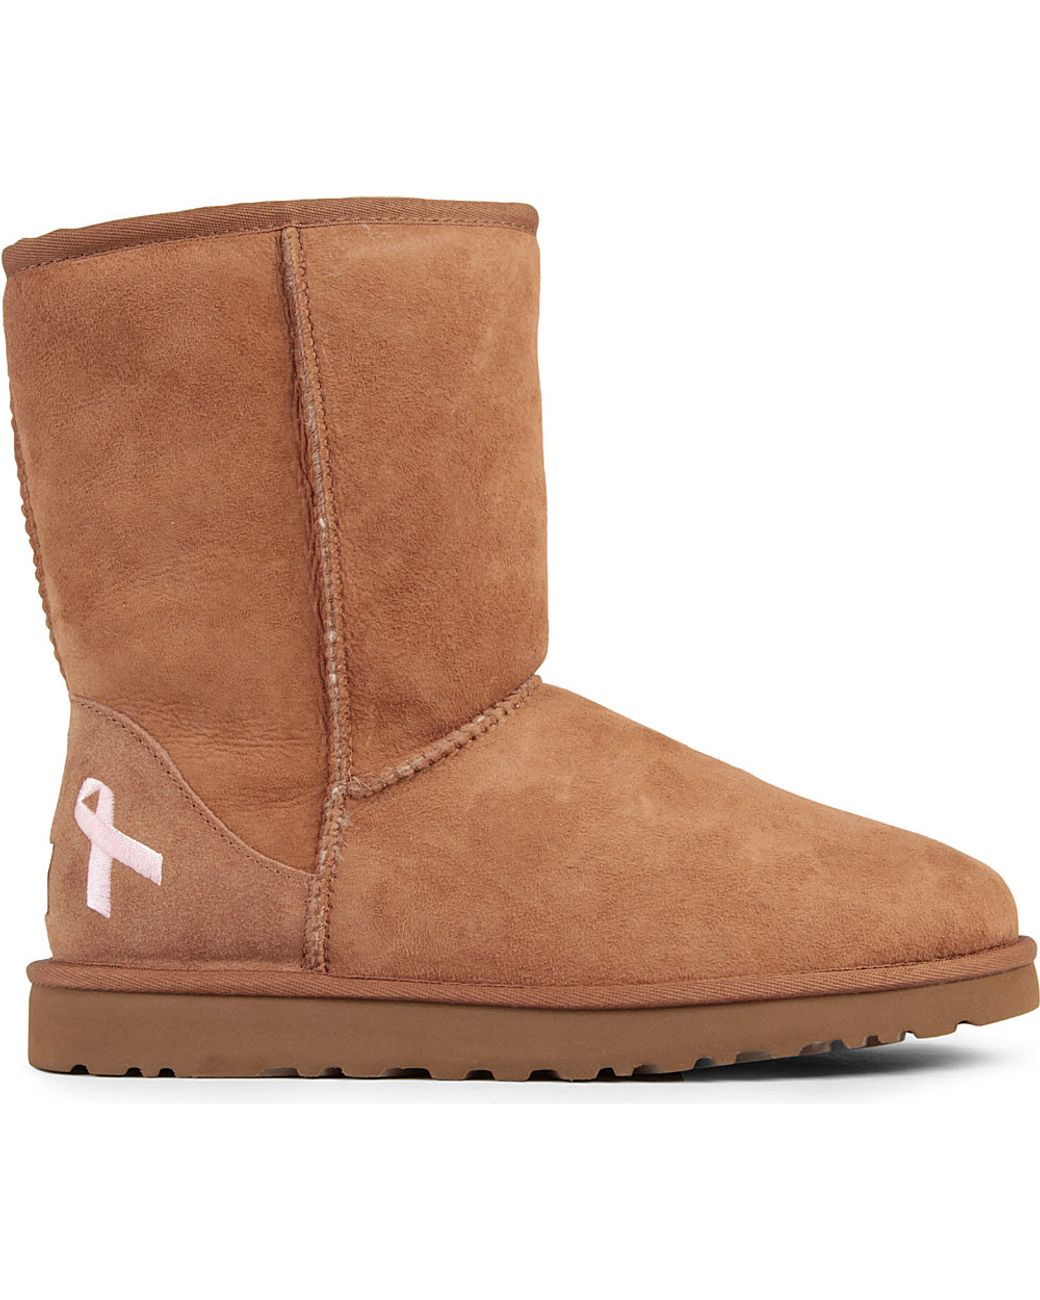 UGG Classic Short Breast Cancer Awareness Boots in Brown | Lyst UK